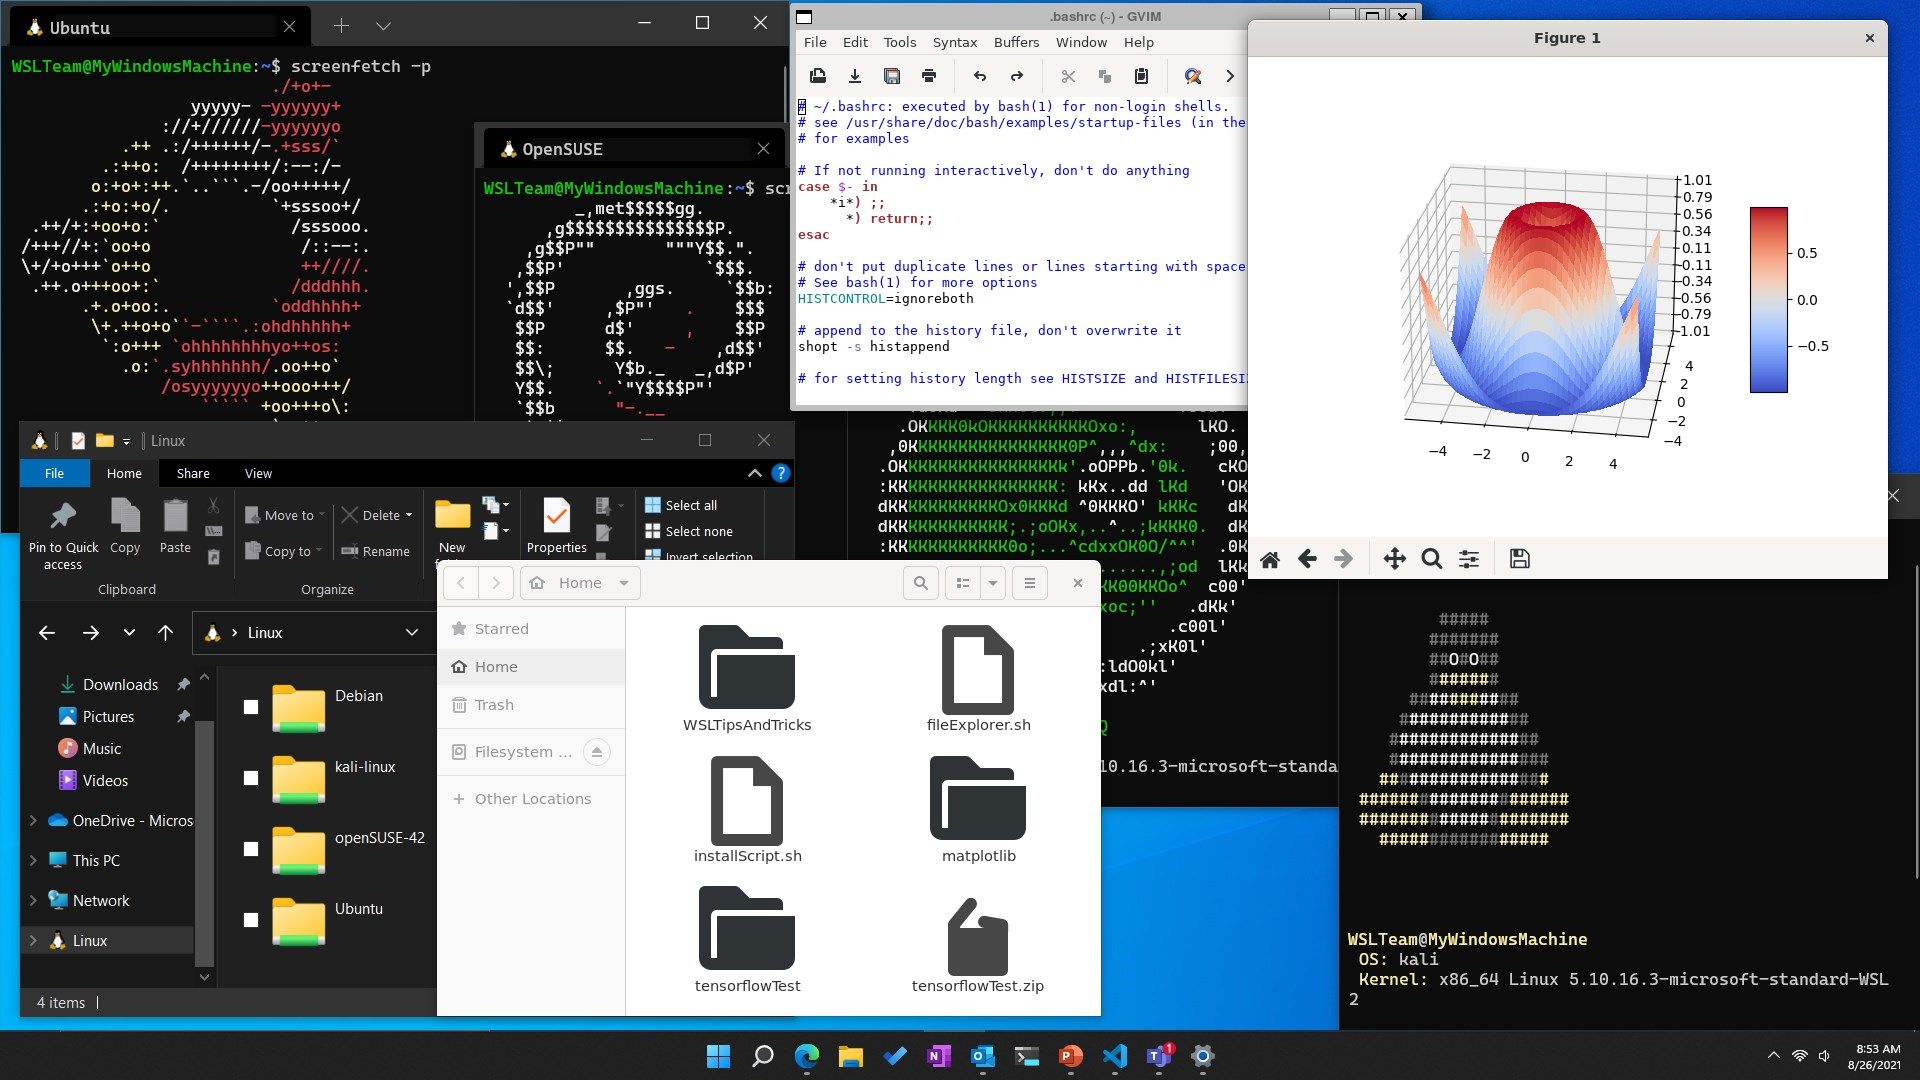 Windows Subsystem for Linux running in multiple windows with Linux GUI applications as well